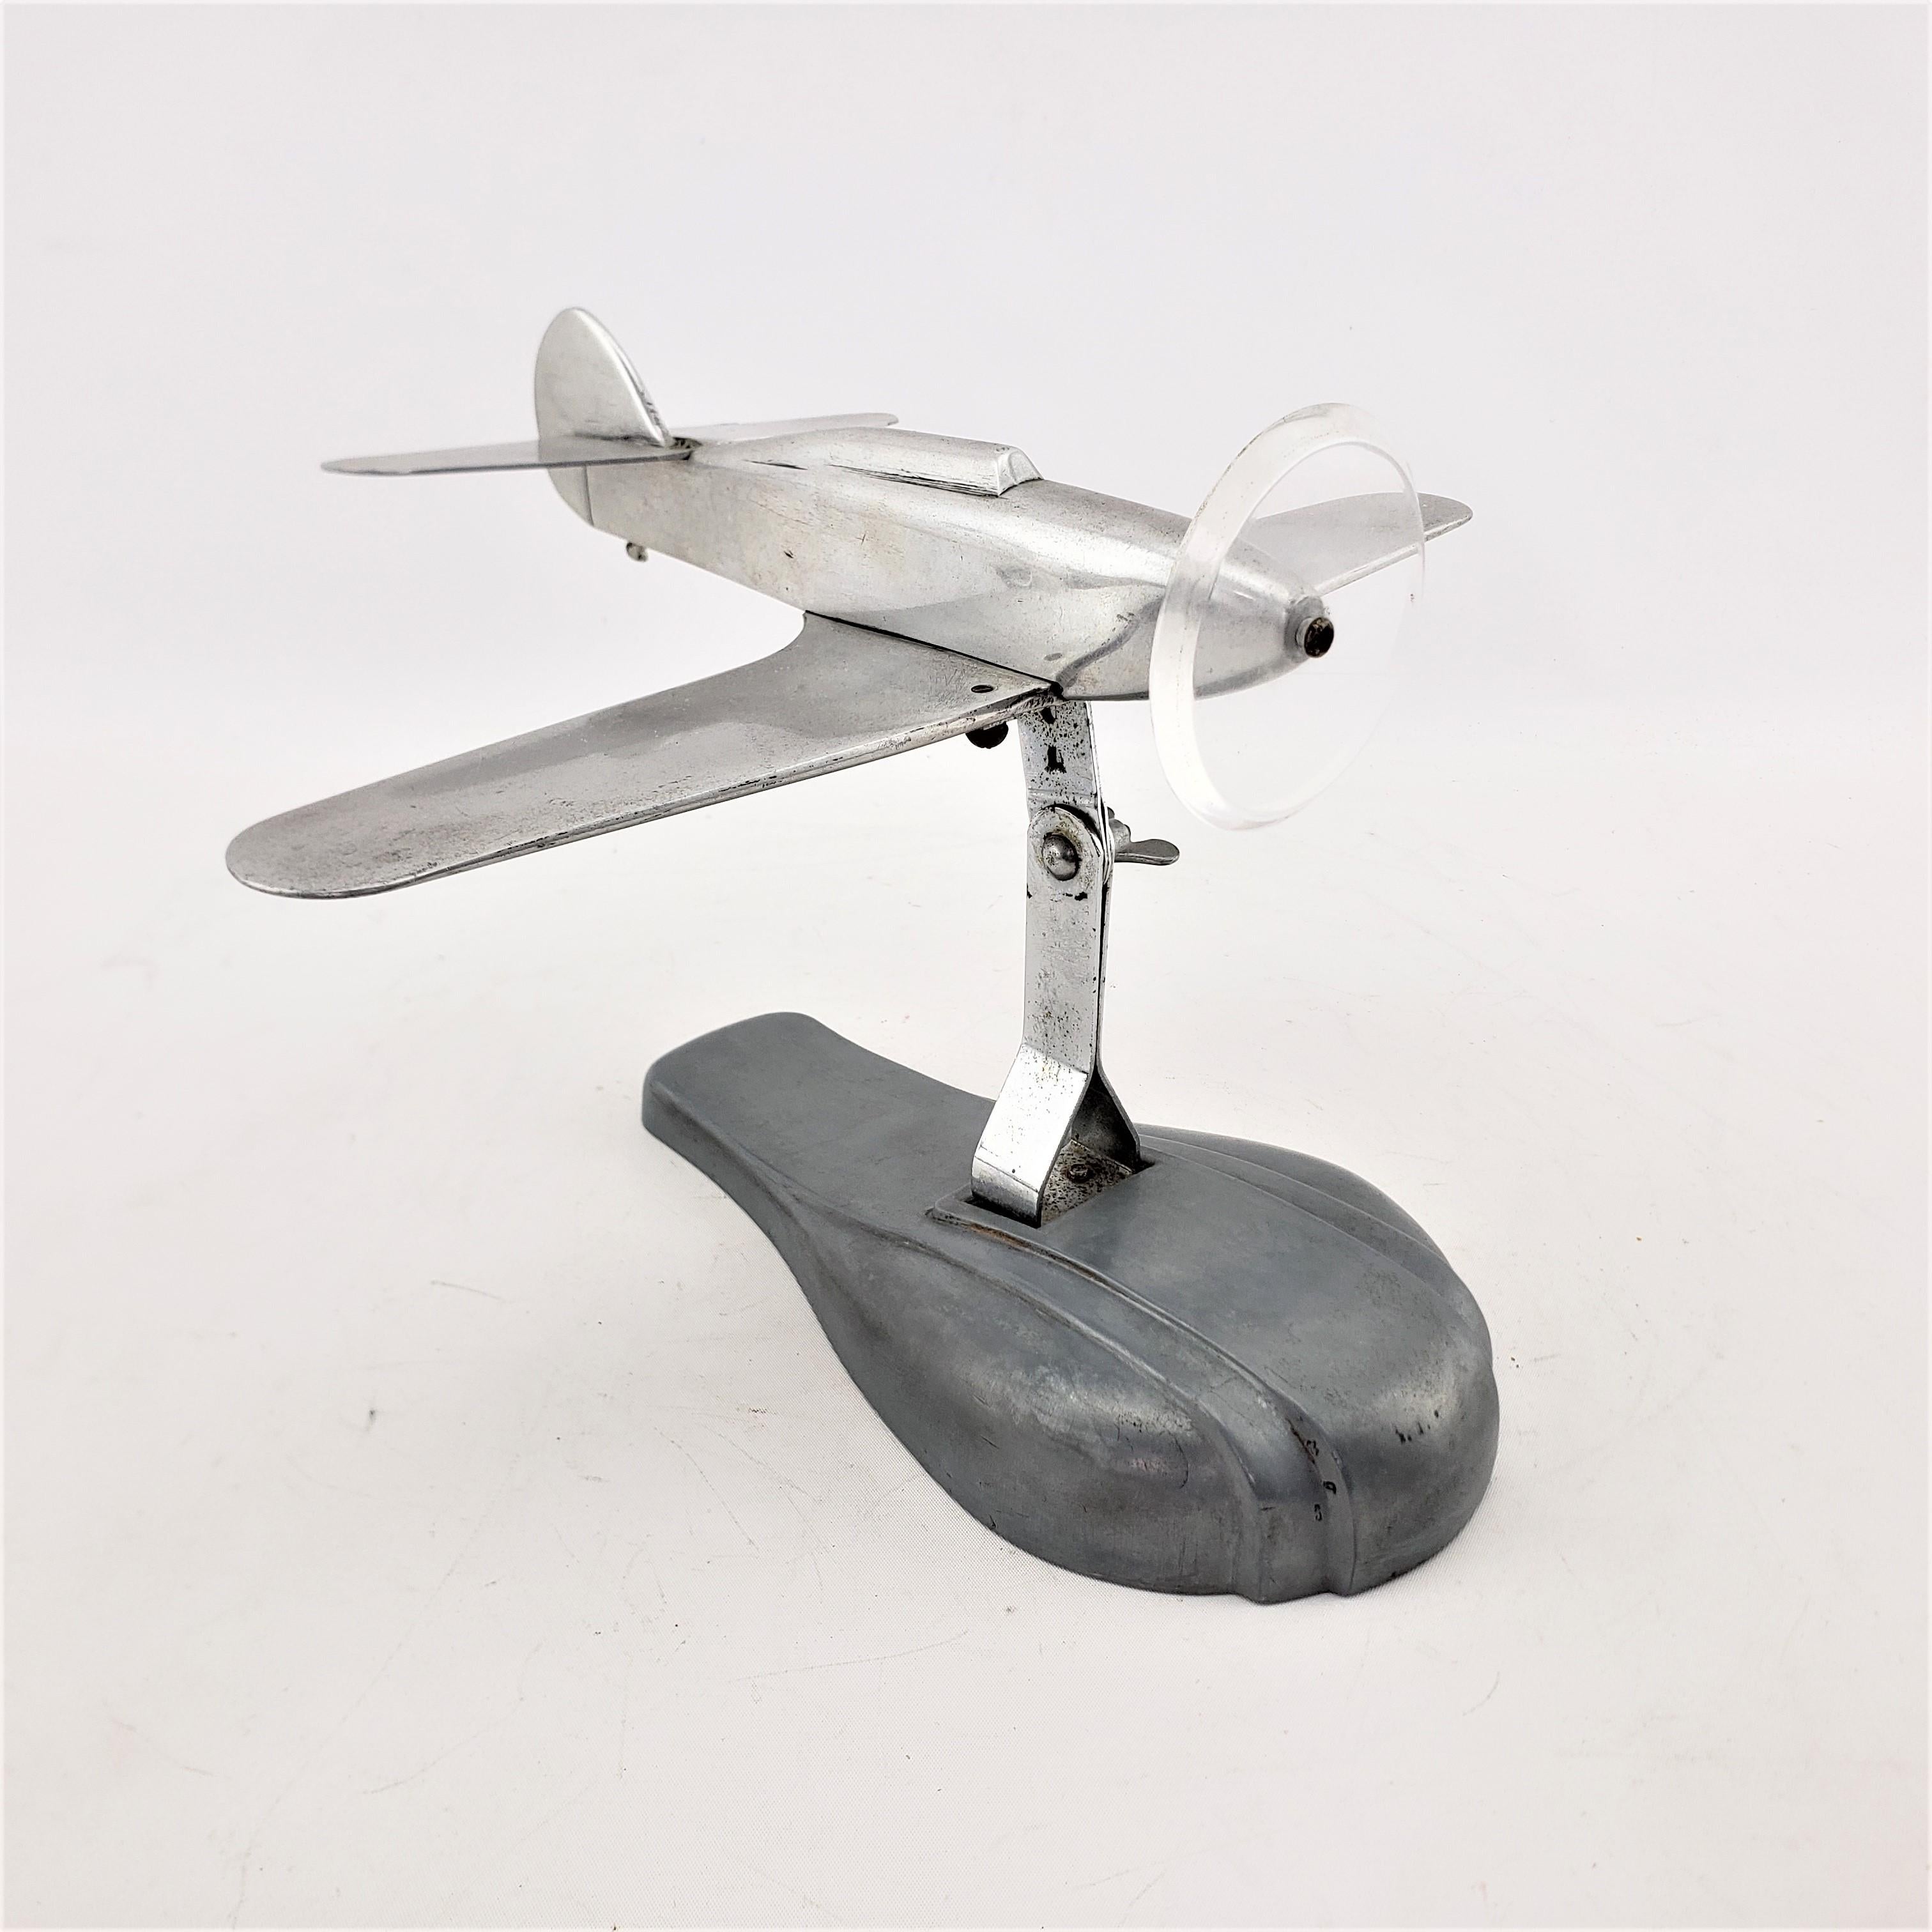 This airplane model or sculpture is unsigned, but presumed to have originated from the United States and dating to approximately 1945 and done in the period streamlined Mid-Century Modern style. The plane is composed of cast and brushed aluminum